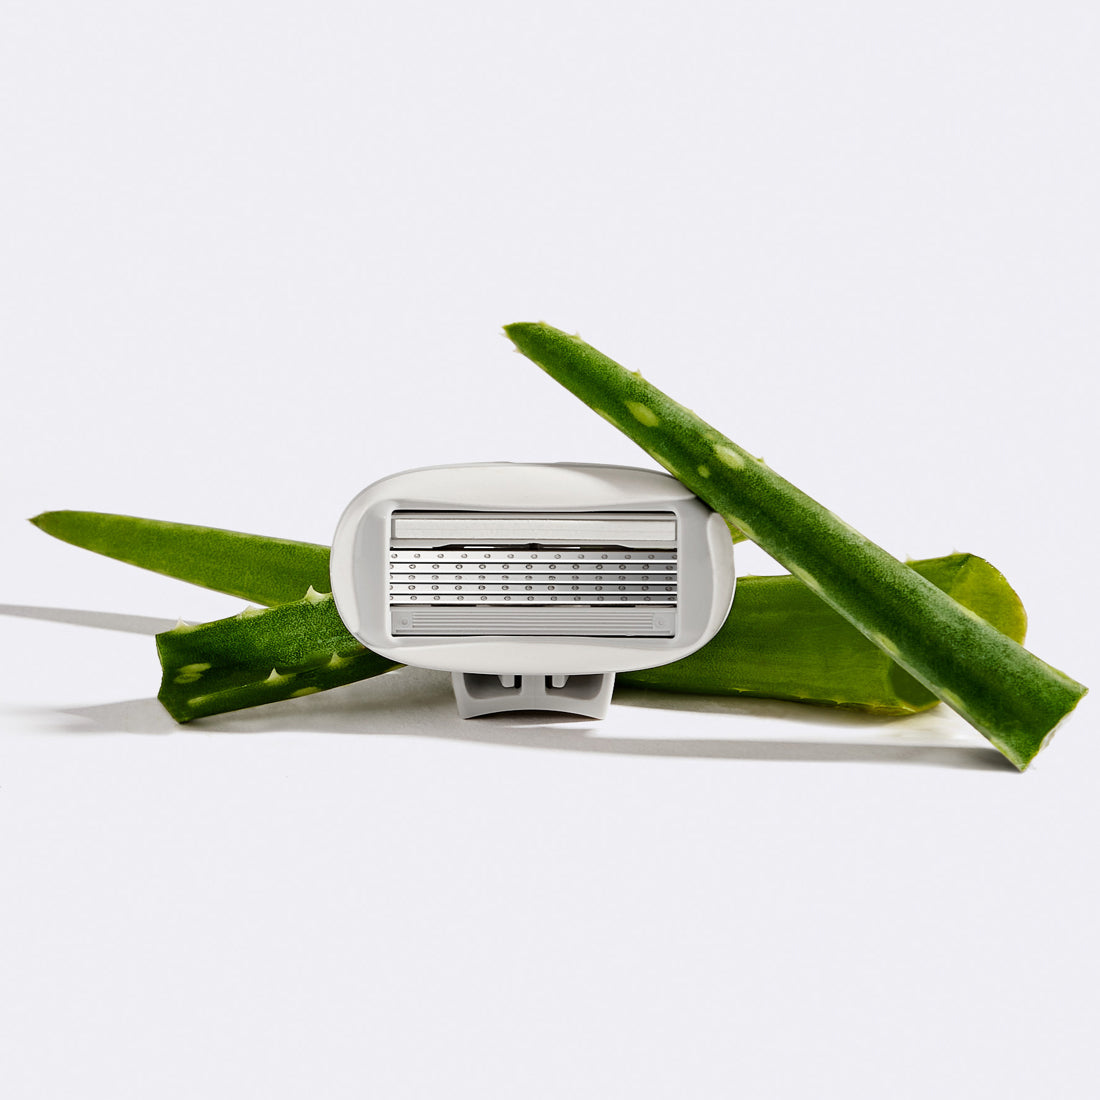 Flamingo Blade cartridge surrounded by aloe leaves, one of the key ingredients in the 360 comfort system that surrounds the blades